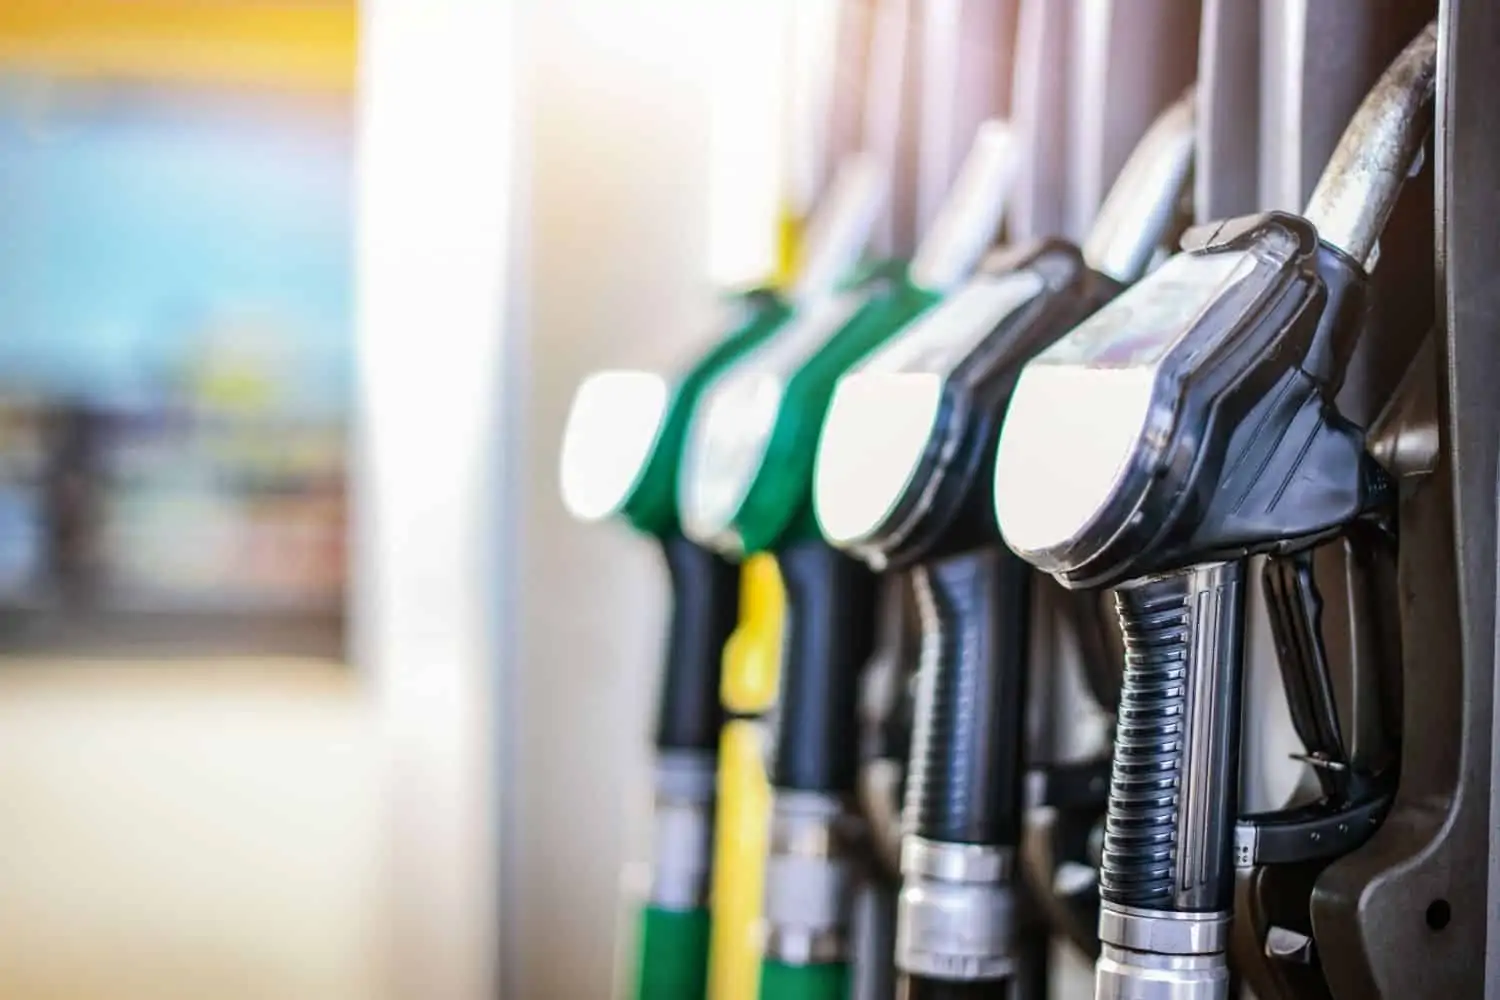 October fuel prices are shared by Department of Energy